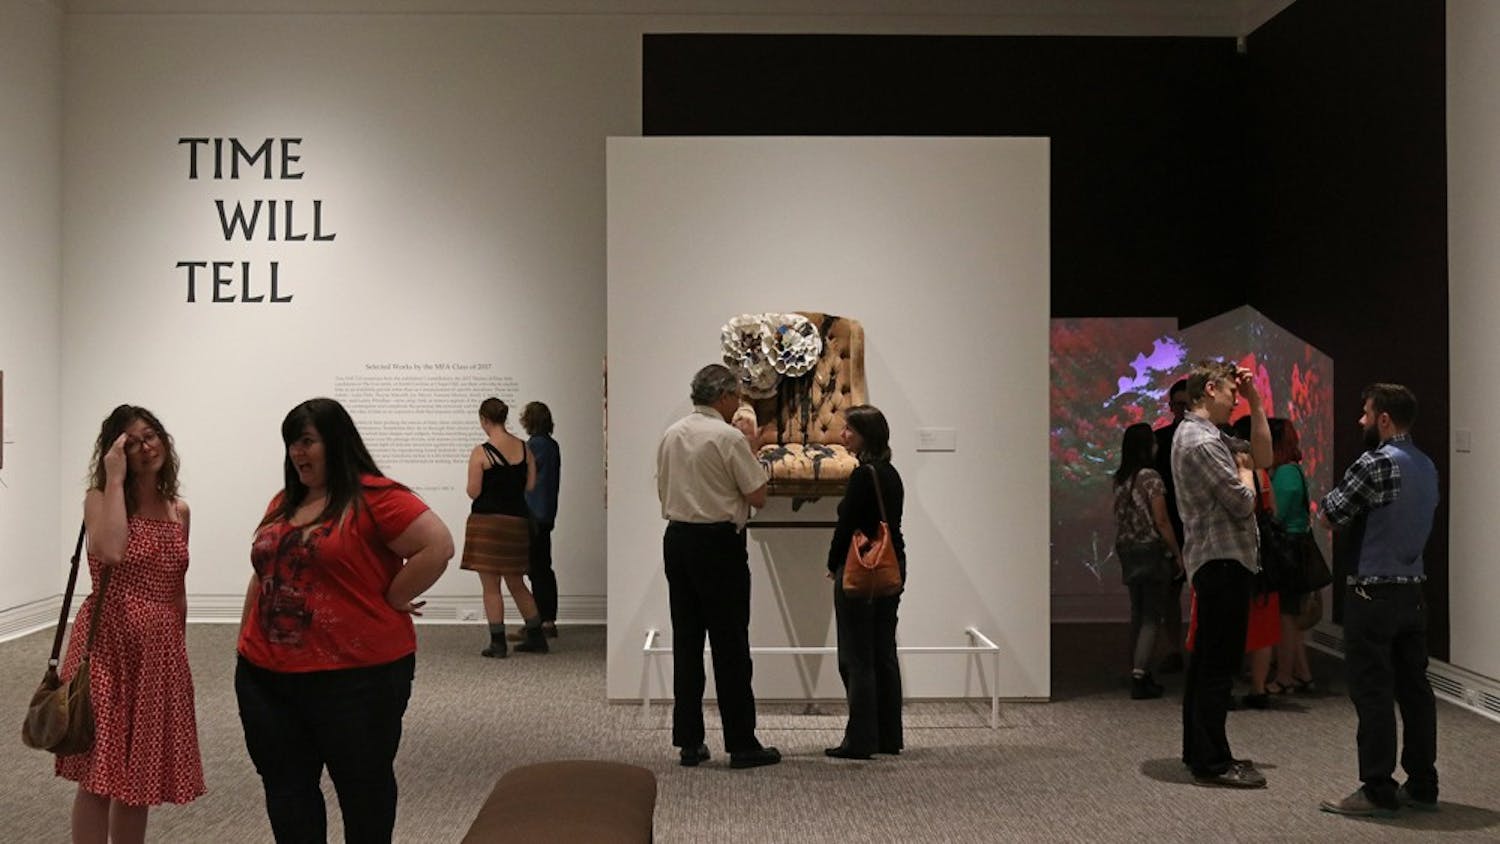 The new "Time Will Tell" exhibit at the Ackland opened Thursday. The exhibit features art from MFA Students at the university.&nbsp;